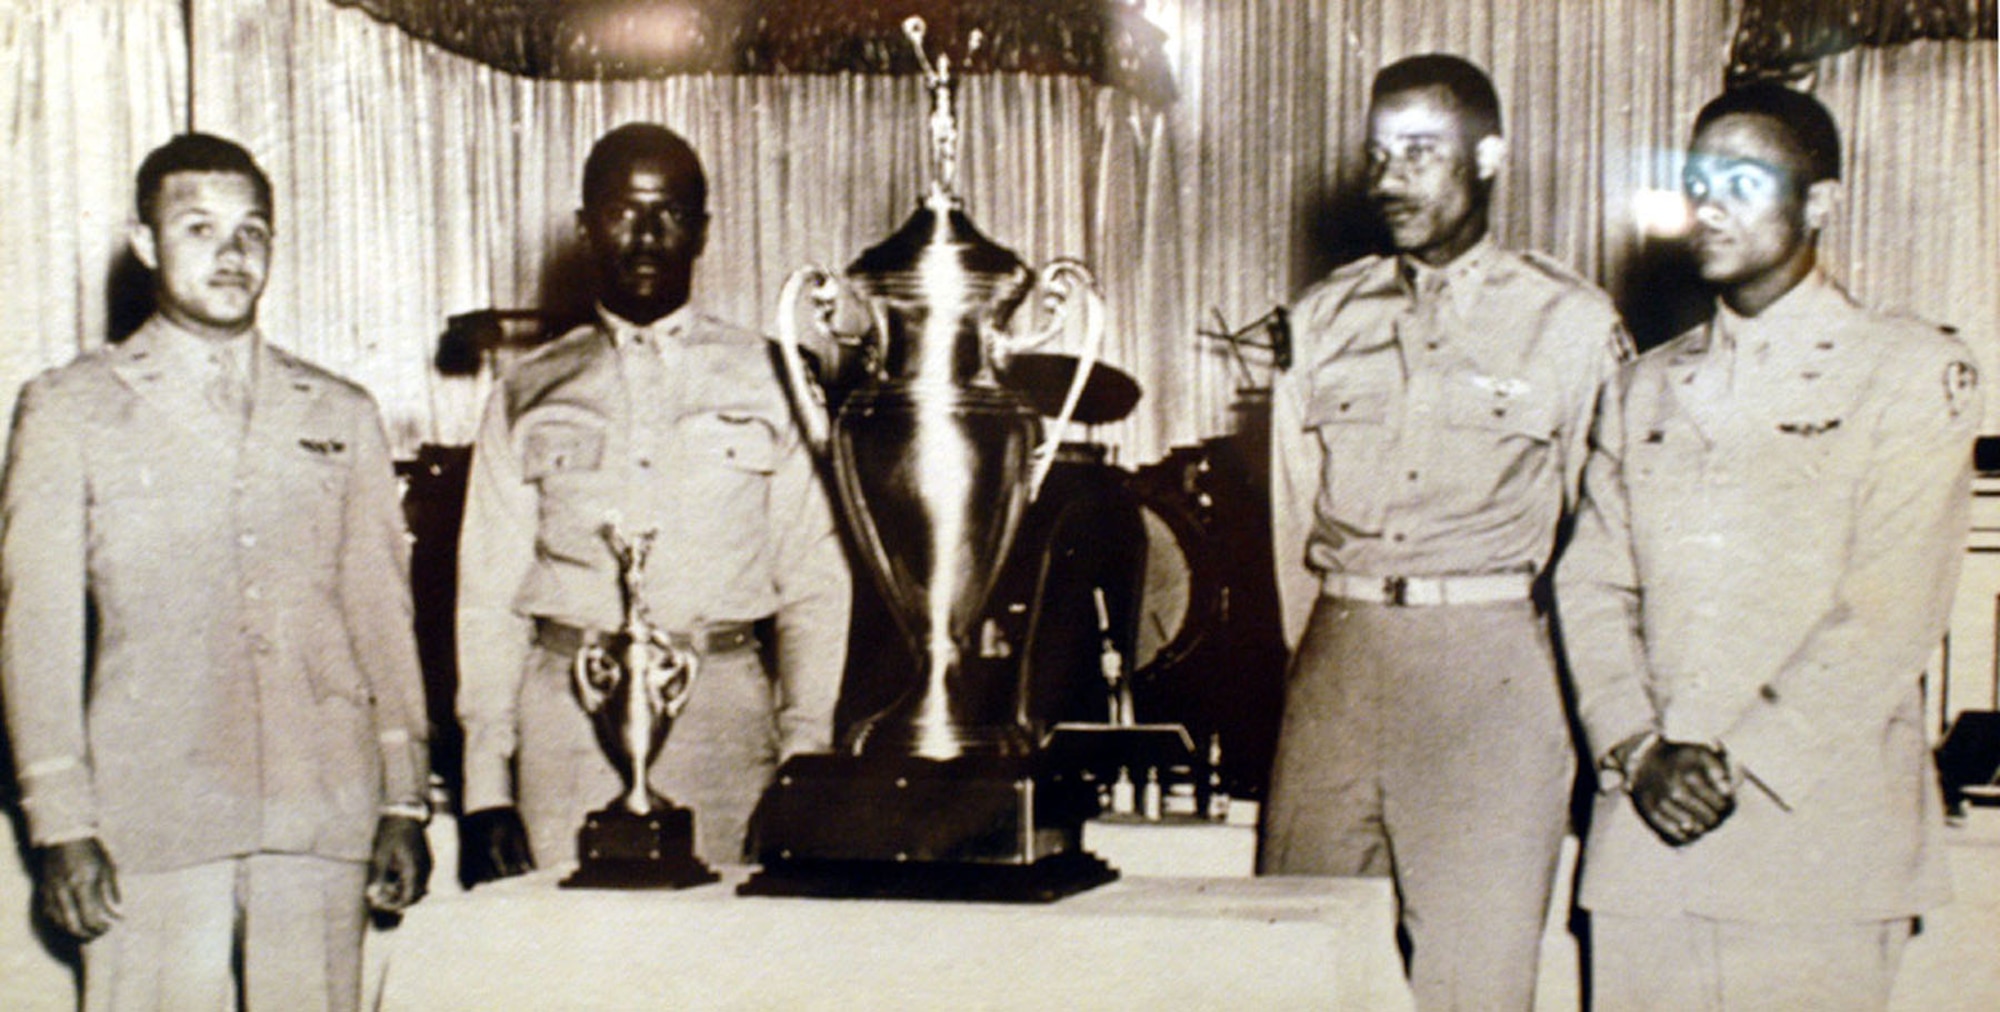 U.S. Air Force Capt. Alva Temple, 1st Lt. James Harvey, 1st Lt. Harry Stewart and 1st Lt. Halbert Alexander pose with their 1949 Weapons Meet trophy in May 1949 at the Flamingo Hotel in Las Vegas, Nev. The trophy went missing for 55 years, but is now displayed at the National Museum of the U.S.Air Force at Wright Patterson Air Force Base, Ohio. (U.S. Air Force photo)